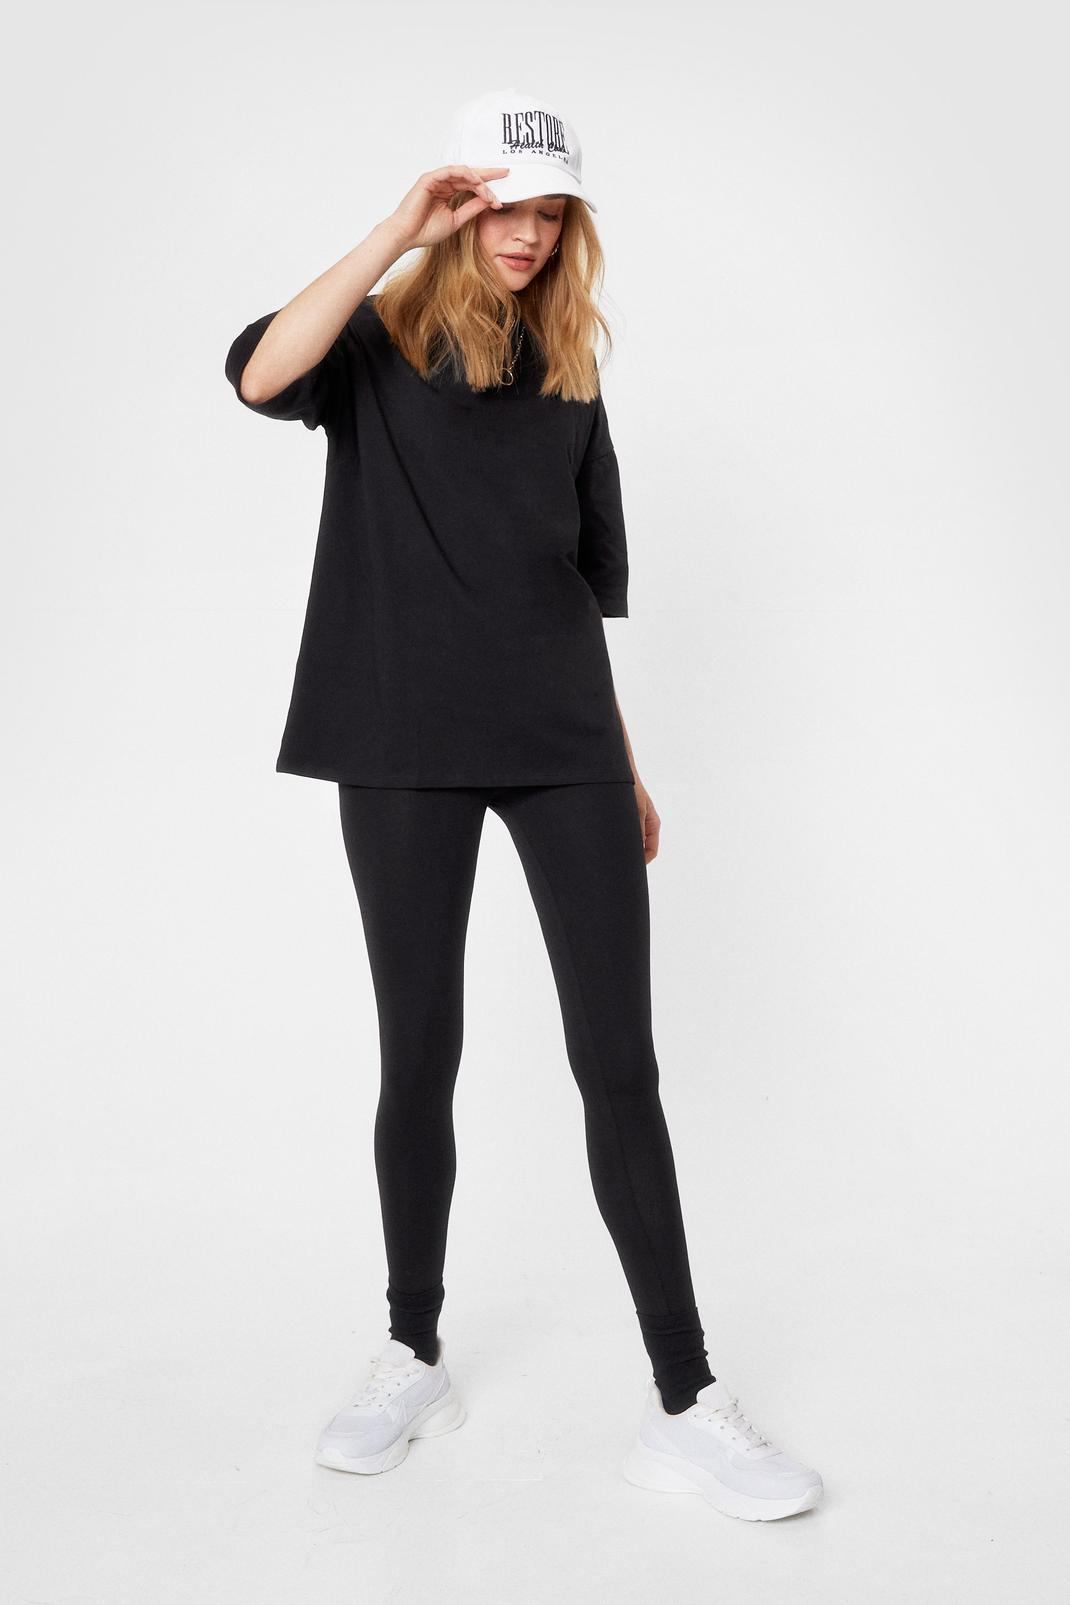 Leggings and Oversized Tees